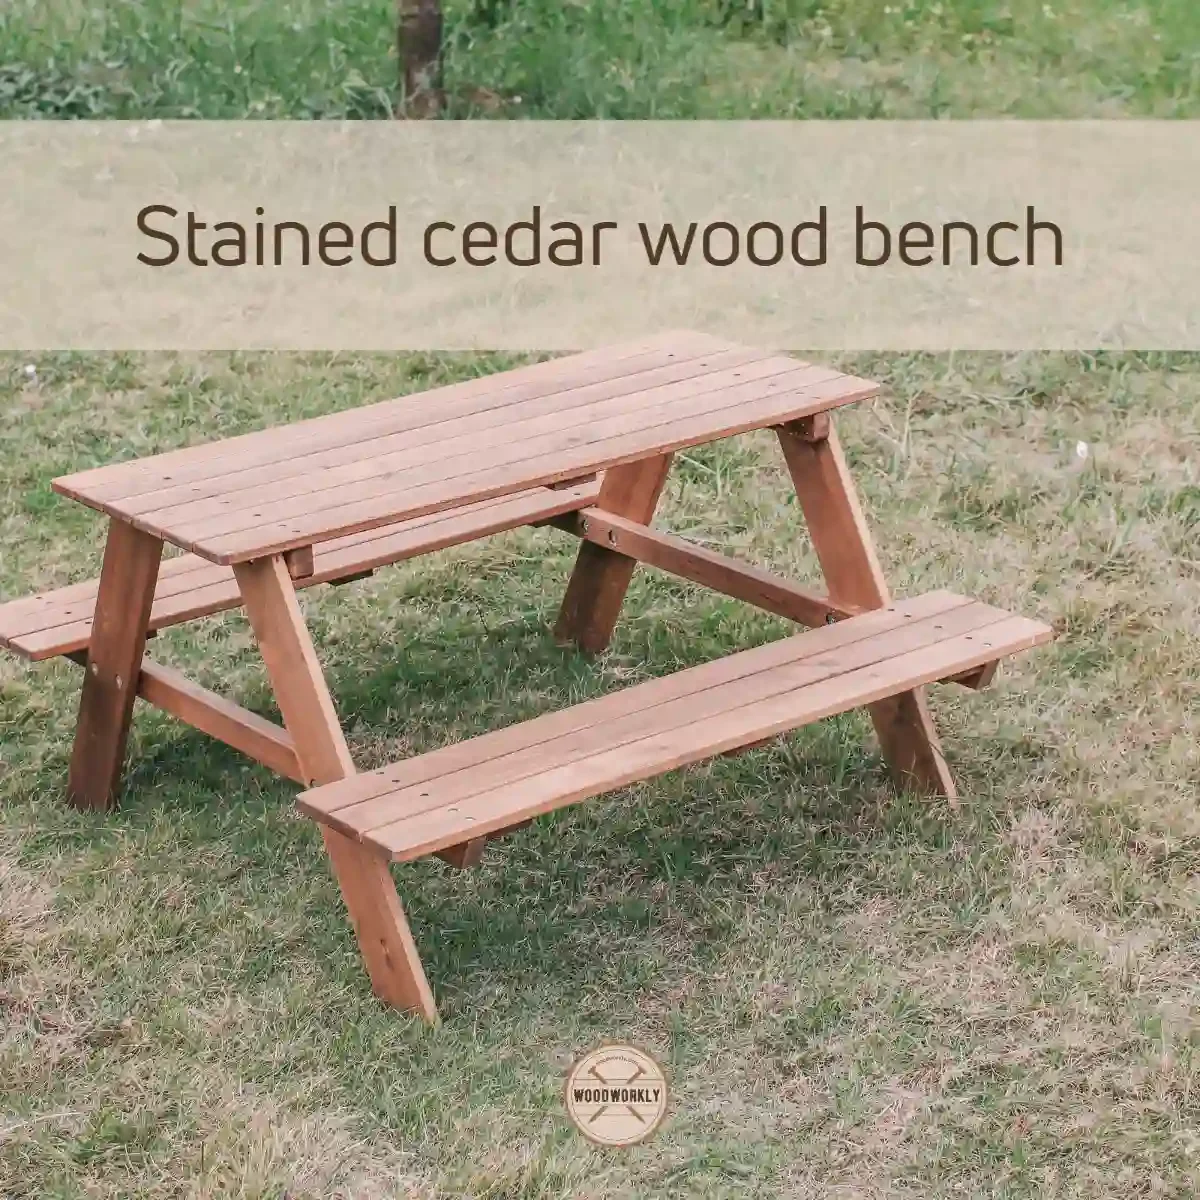 Stained cedar wood bench